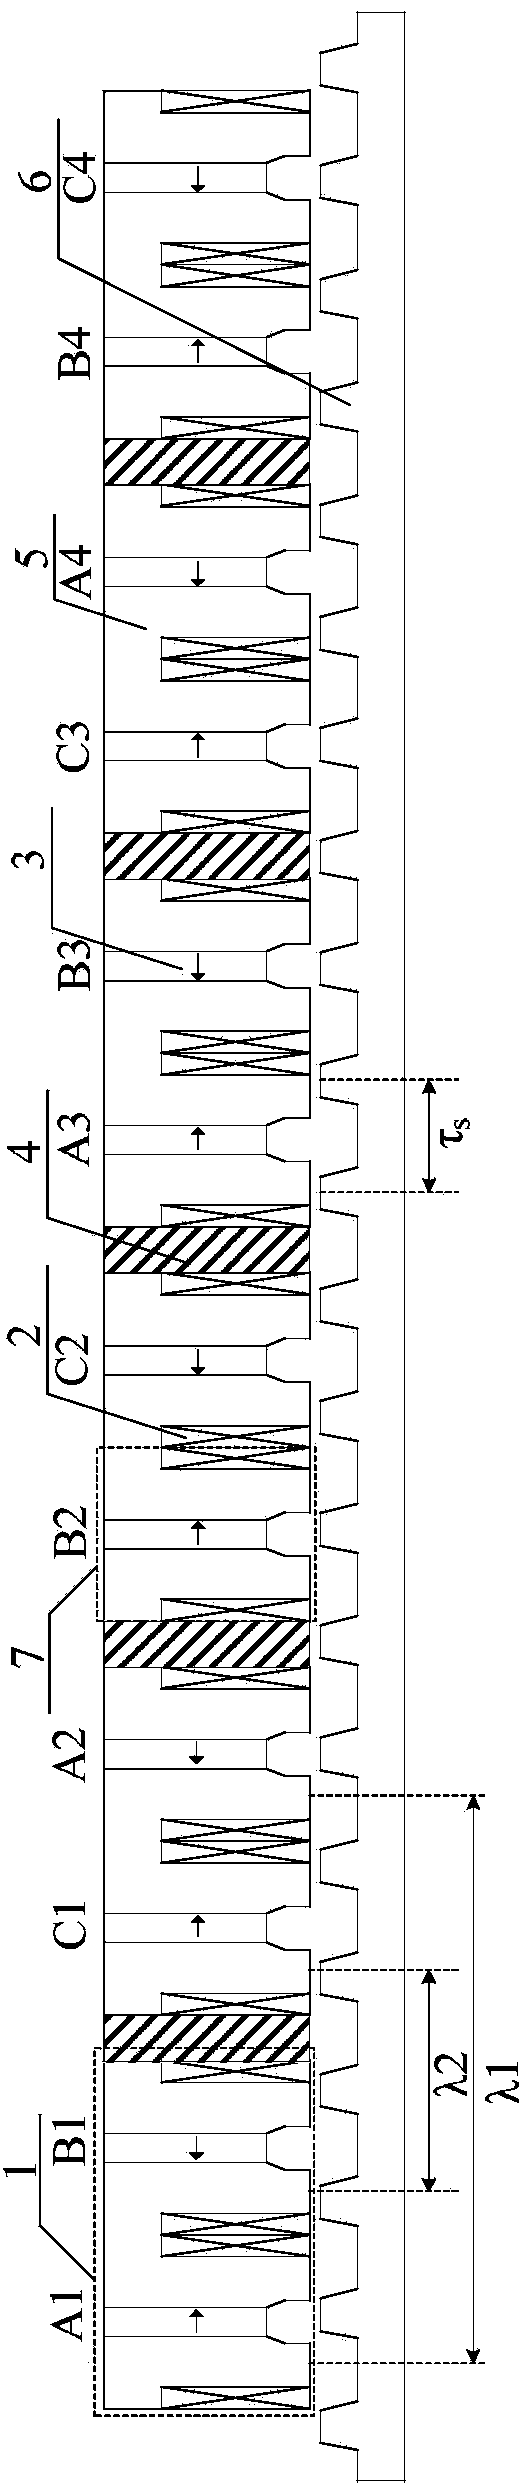 T-type flux-switching permanent magnet linear motor and modules of T-type flux-switching permanent magnet linear motor